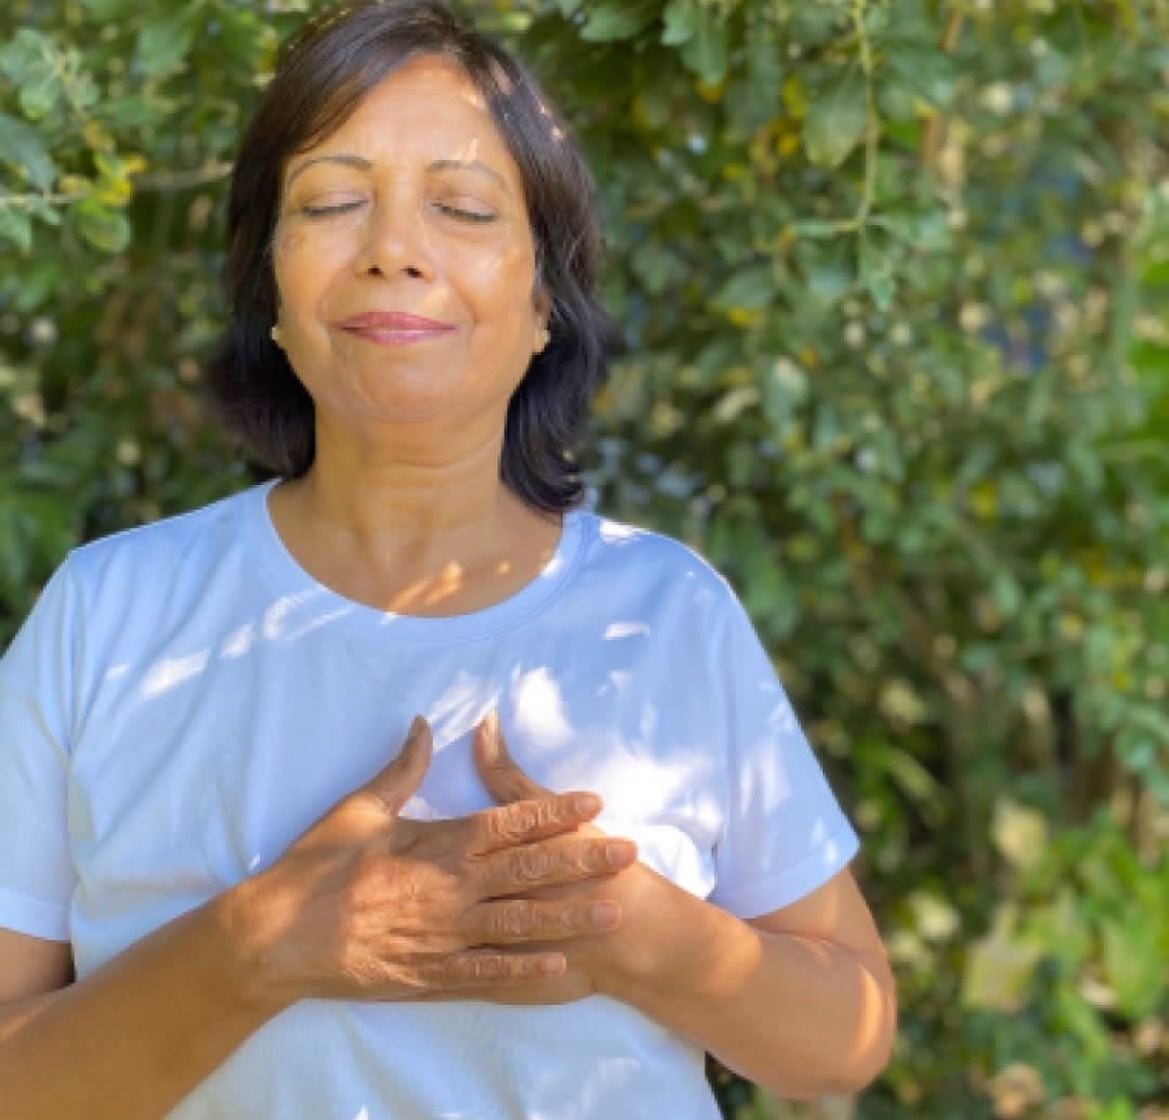 This week we are super excited to offer a POP-UP &lsquo;Intro to Pranayama&rsquo; with Yoga master, coach &amp; nutritionist Neeraja, who is visiting from India &amp; specialises in pranayama to prevent cellular disorders. 

Neeraja Hariharan is a 65